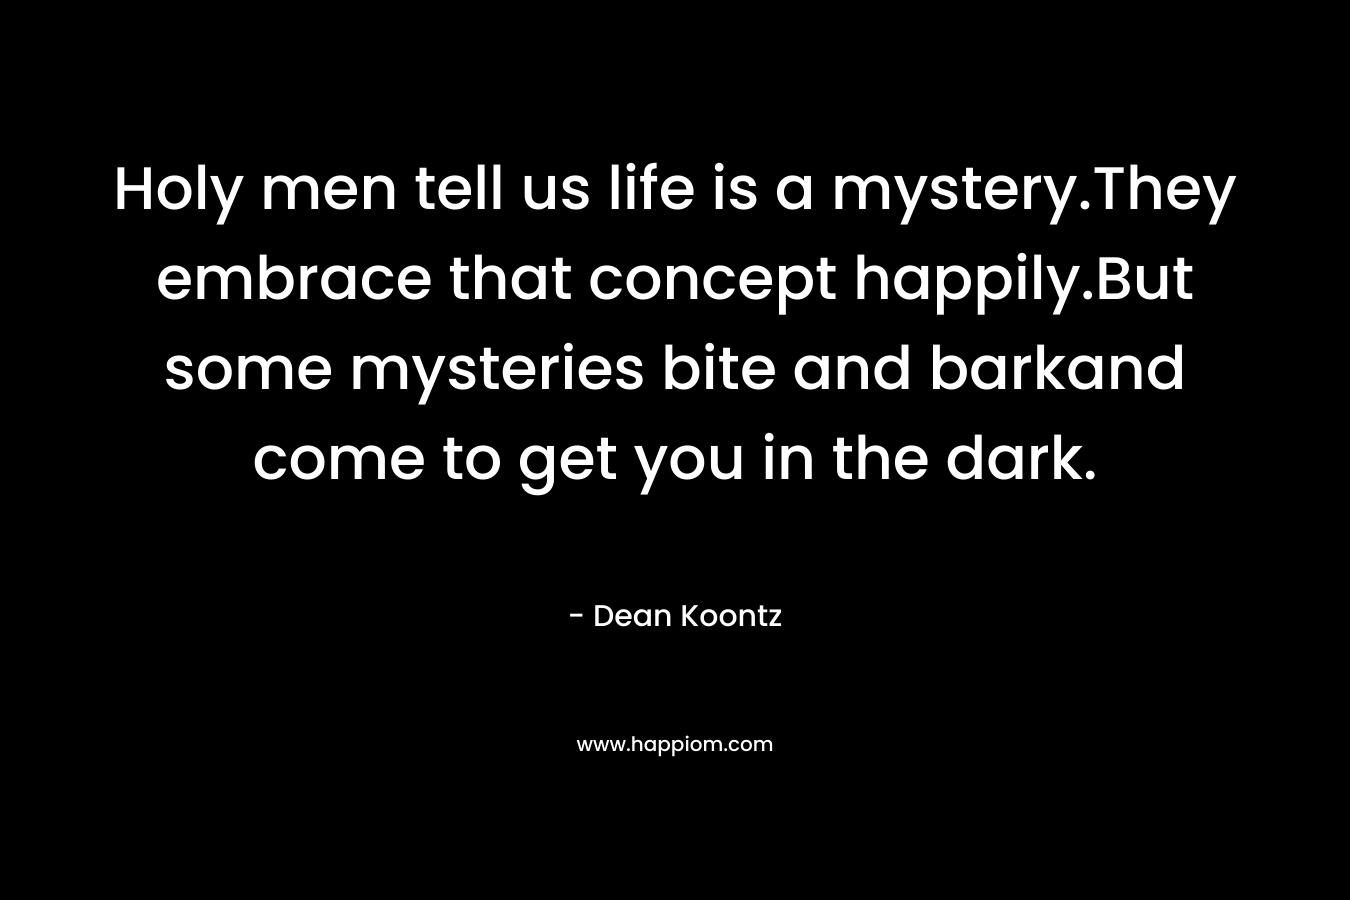 Holy men tell us life is a mystery.They embrace that concept happily.But some mysteries bite and barkand come to get you in the dark.